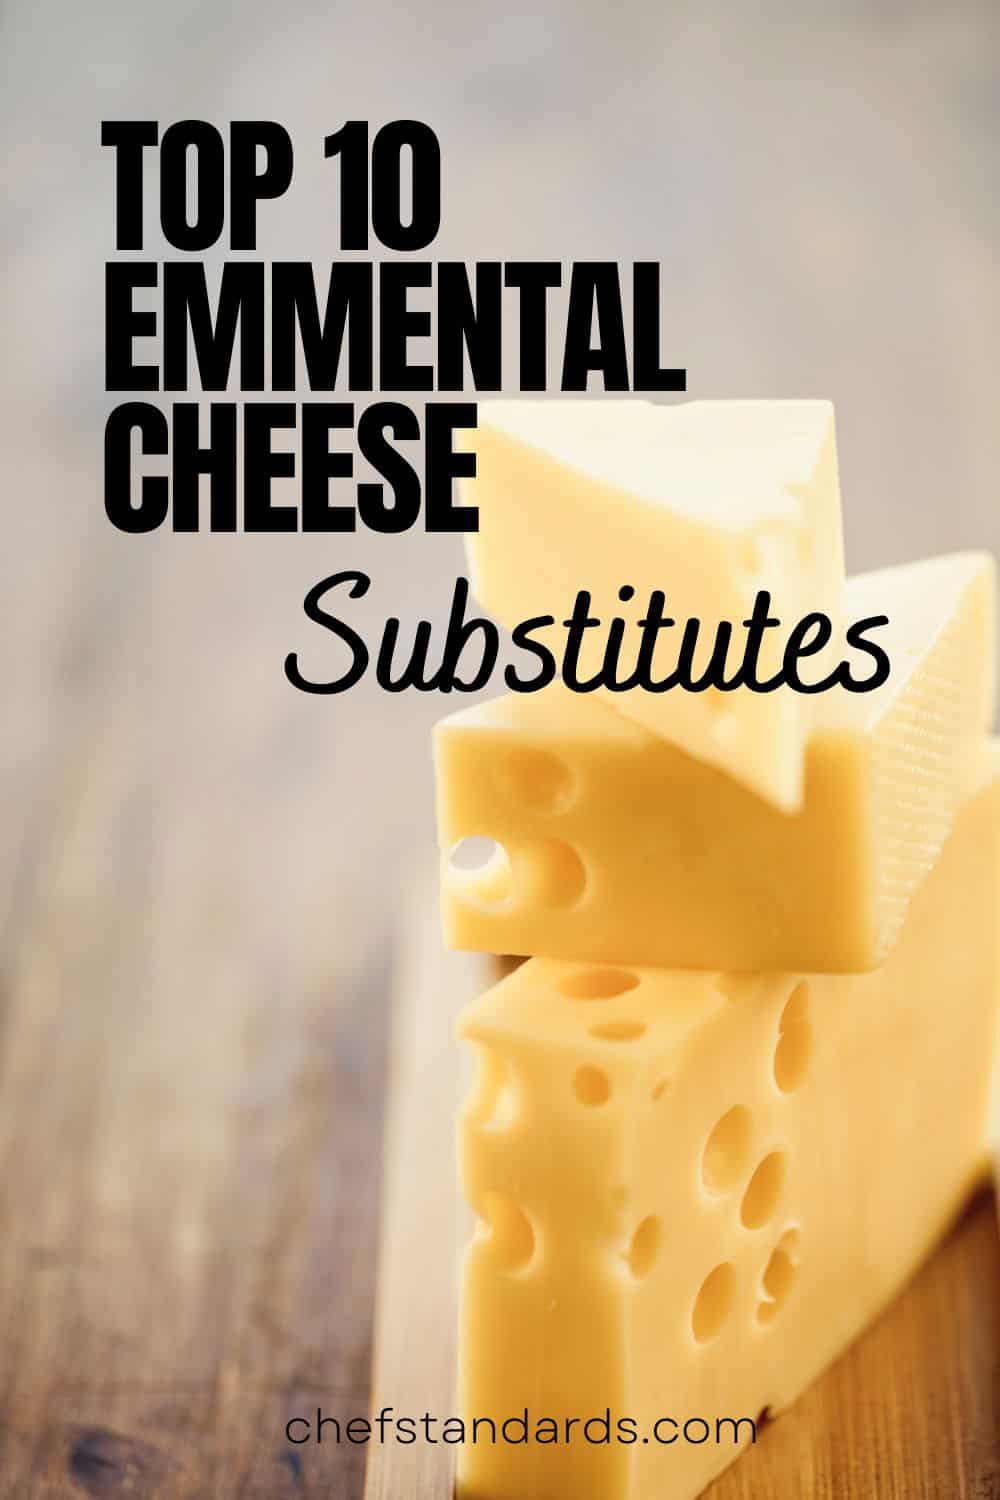 10 Emmental Cheese Substitutes To Unlock Your Cravings
